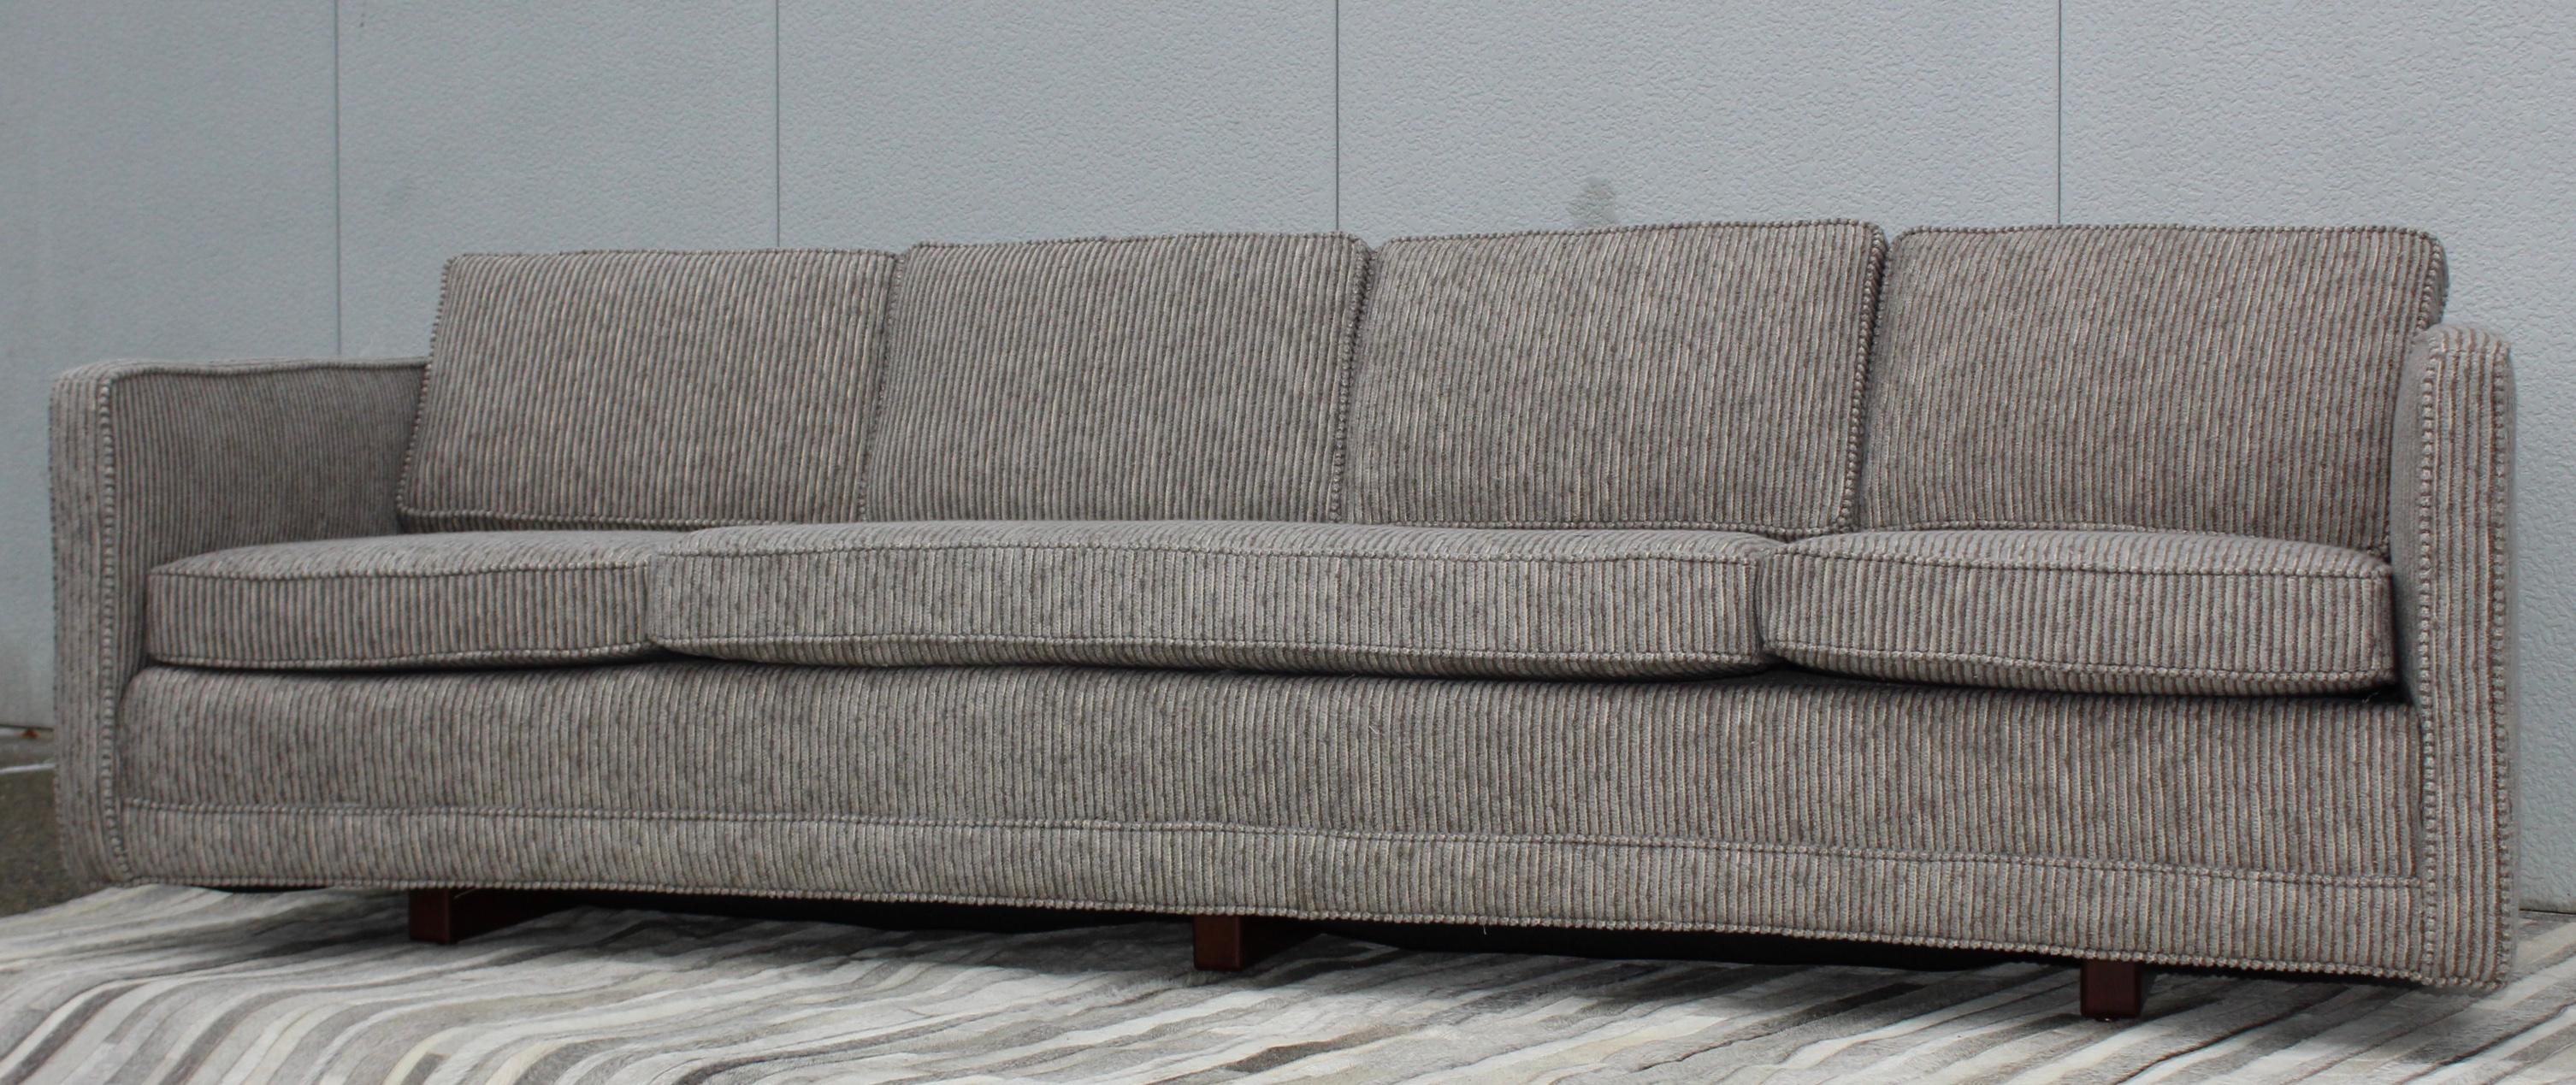 Stunning 1960's Mid-Century Modern long curved custom made sofa designed by Erwin Lambeth, fully restored and reupholstered in Donghia fabric, the sofa is well made very heavy and comfortable.